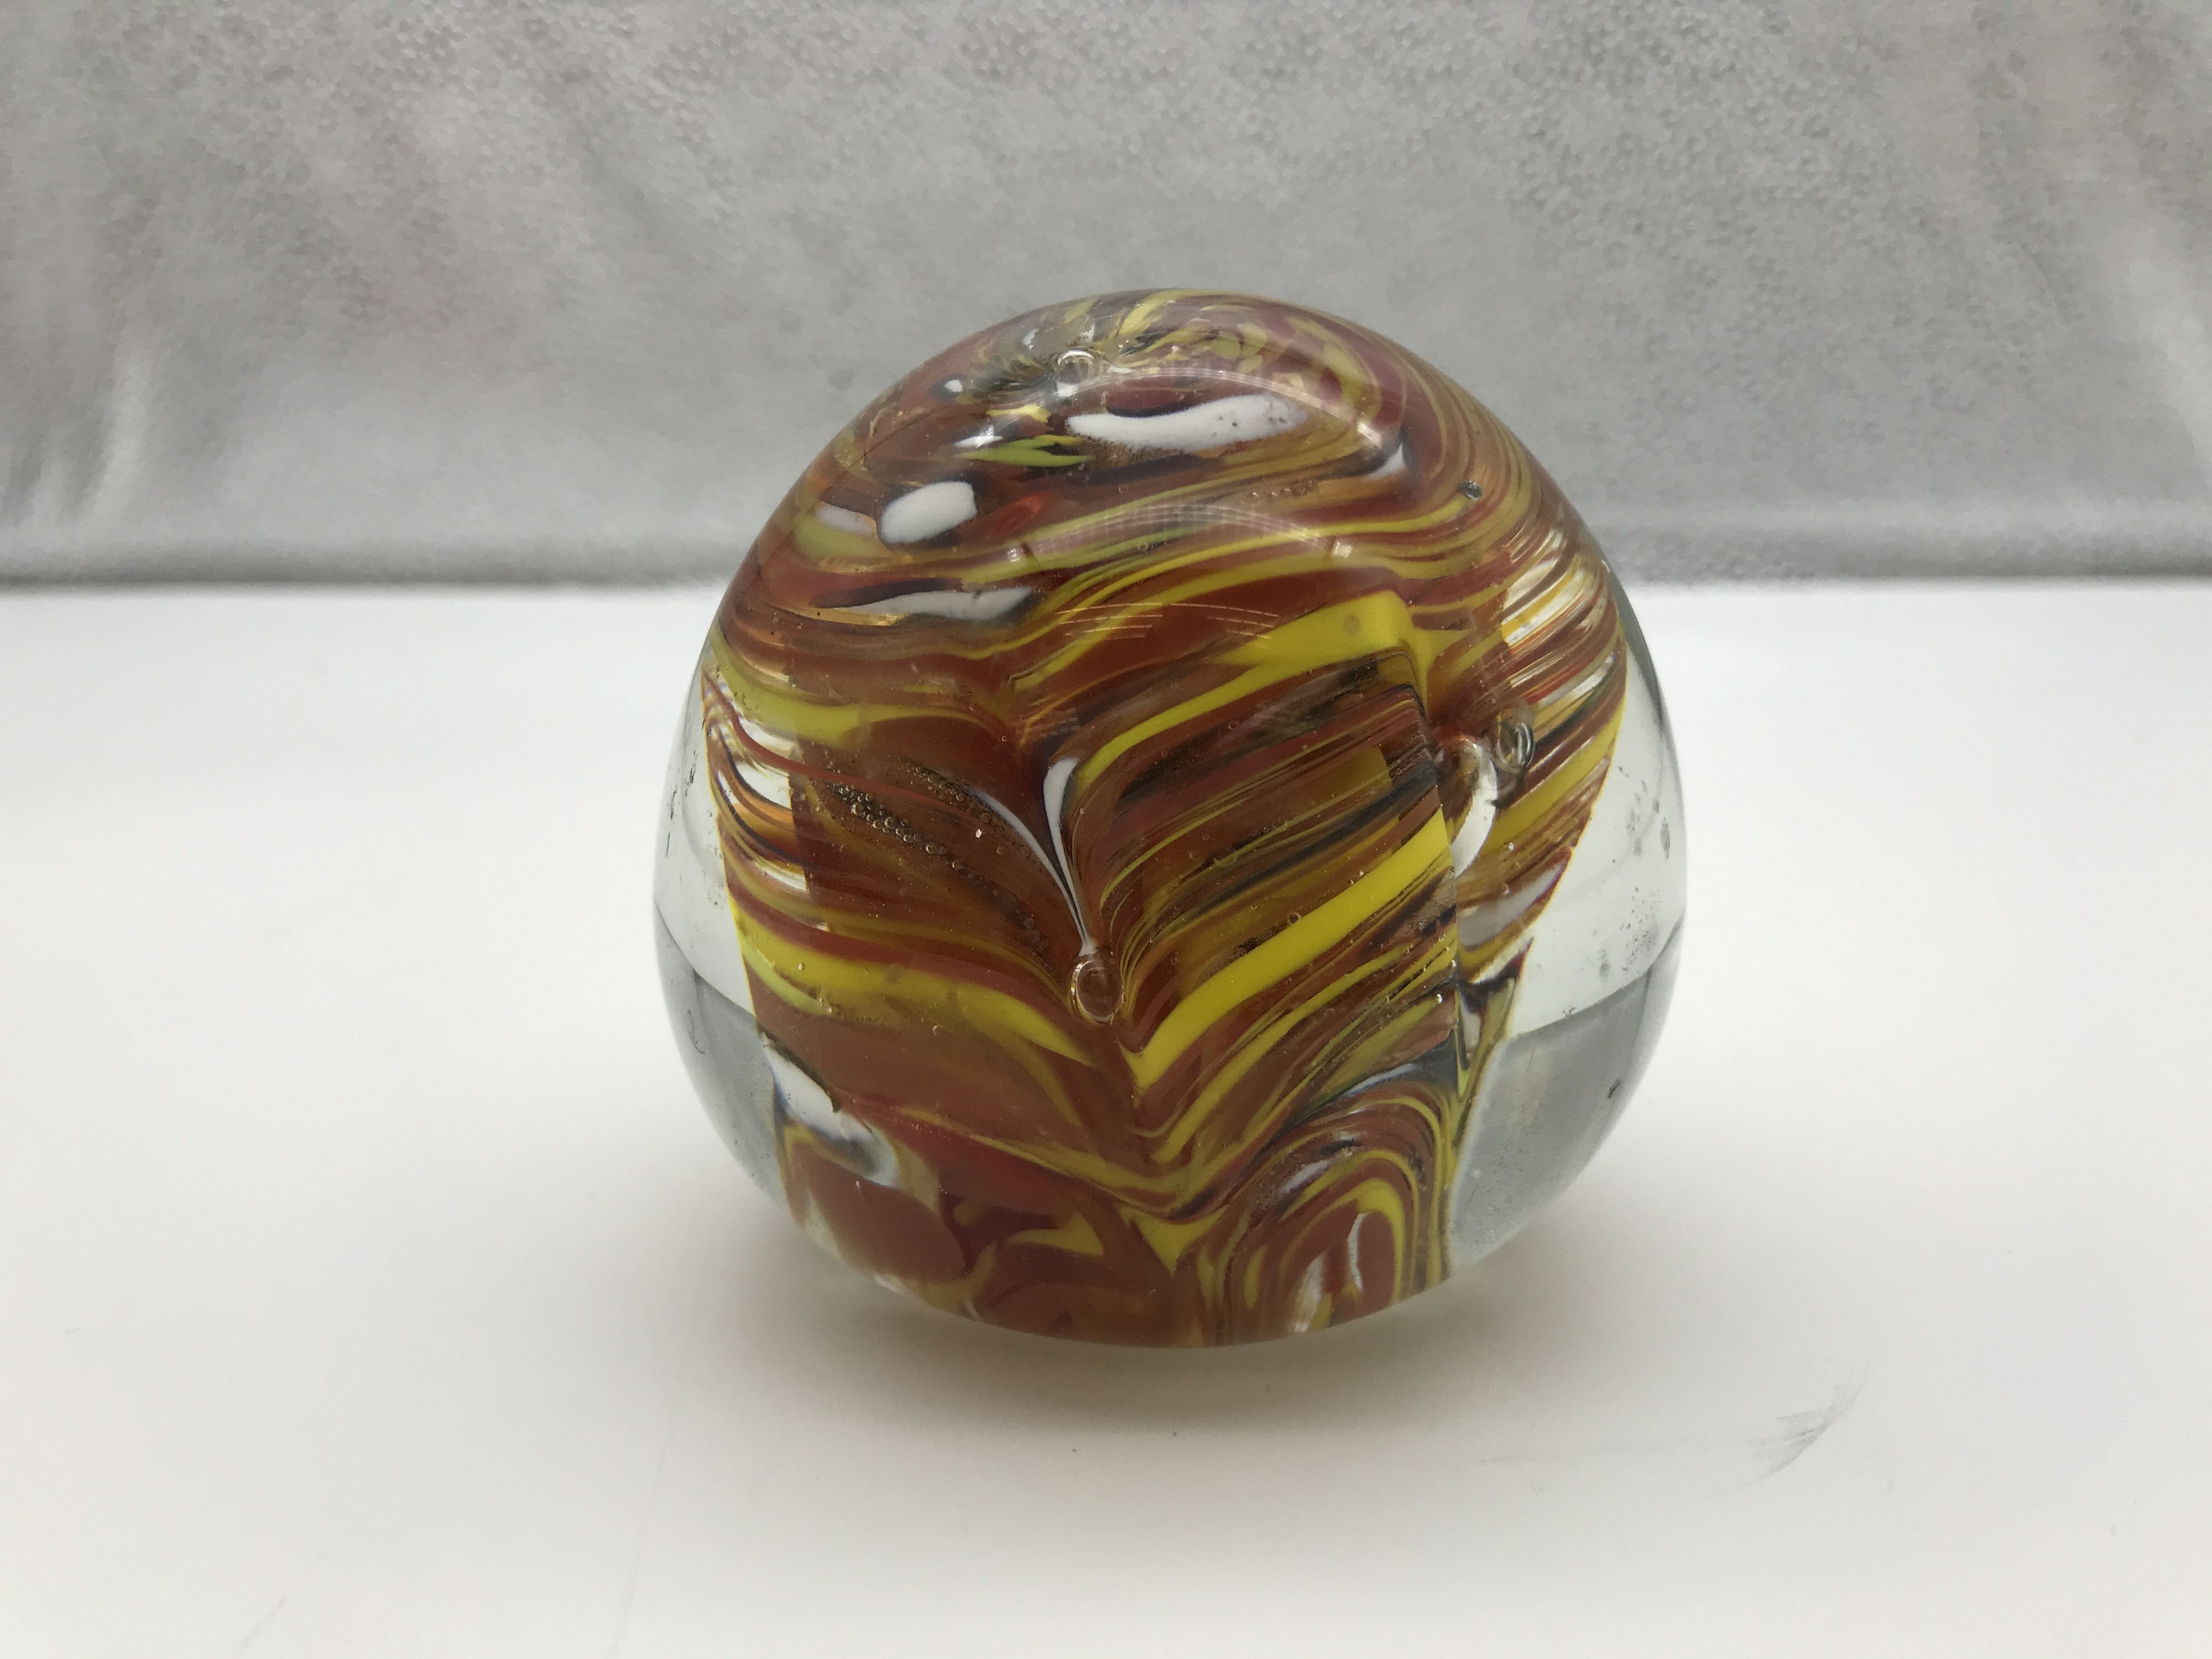 Orange, Yellow, And White Swirl Rounded Glass Desktop Paperweight